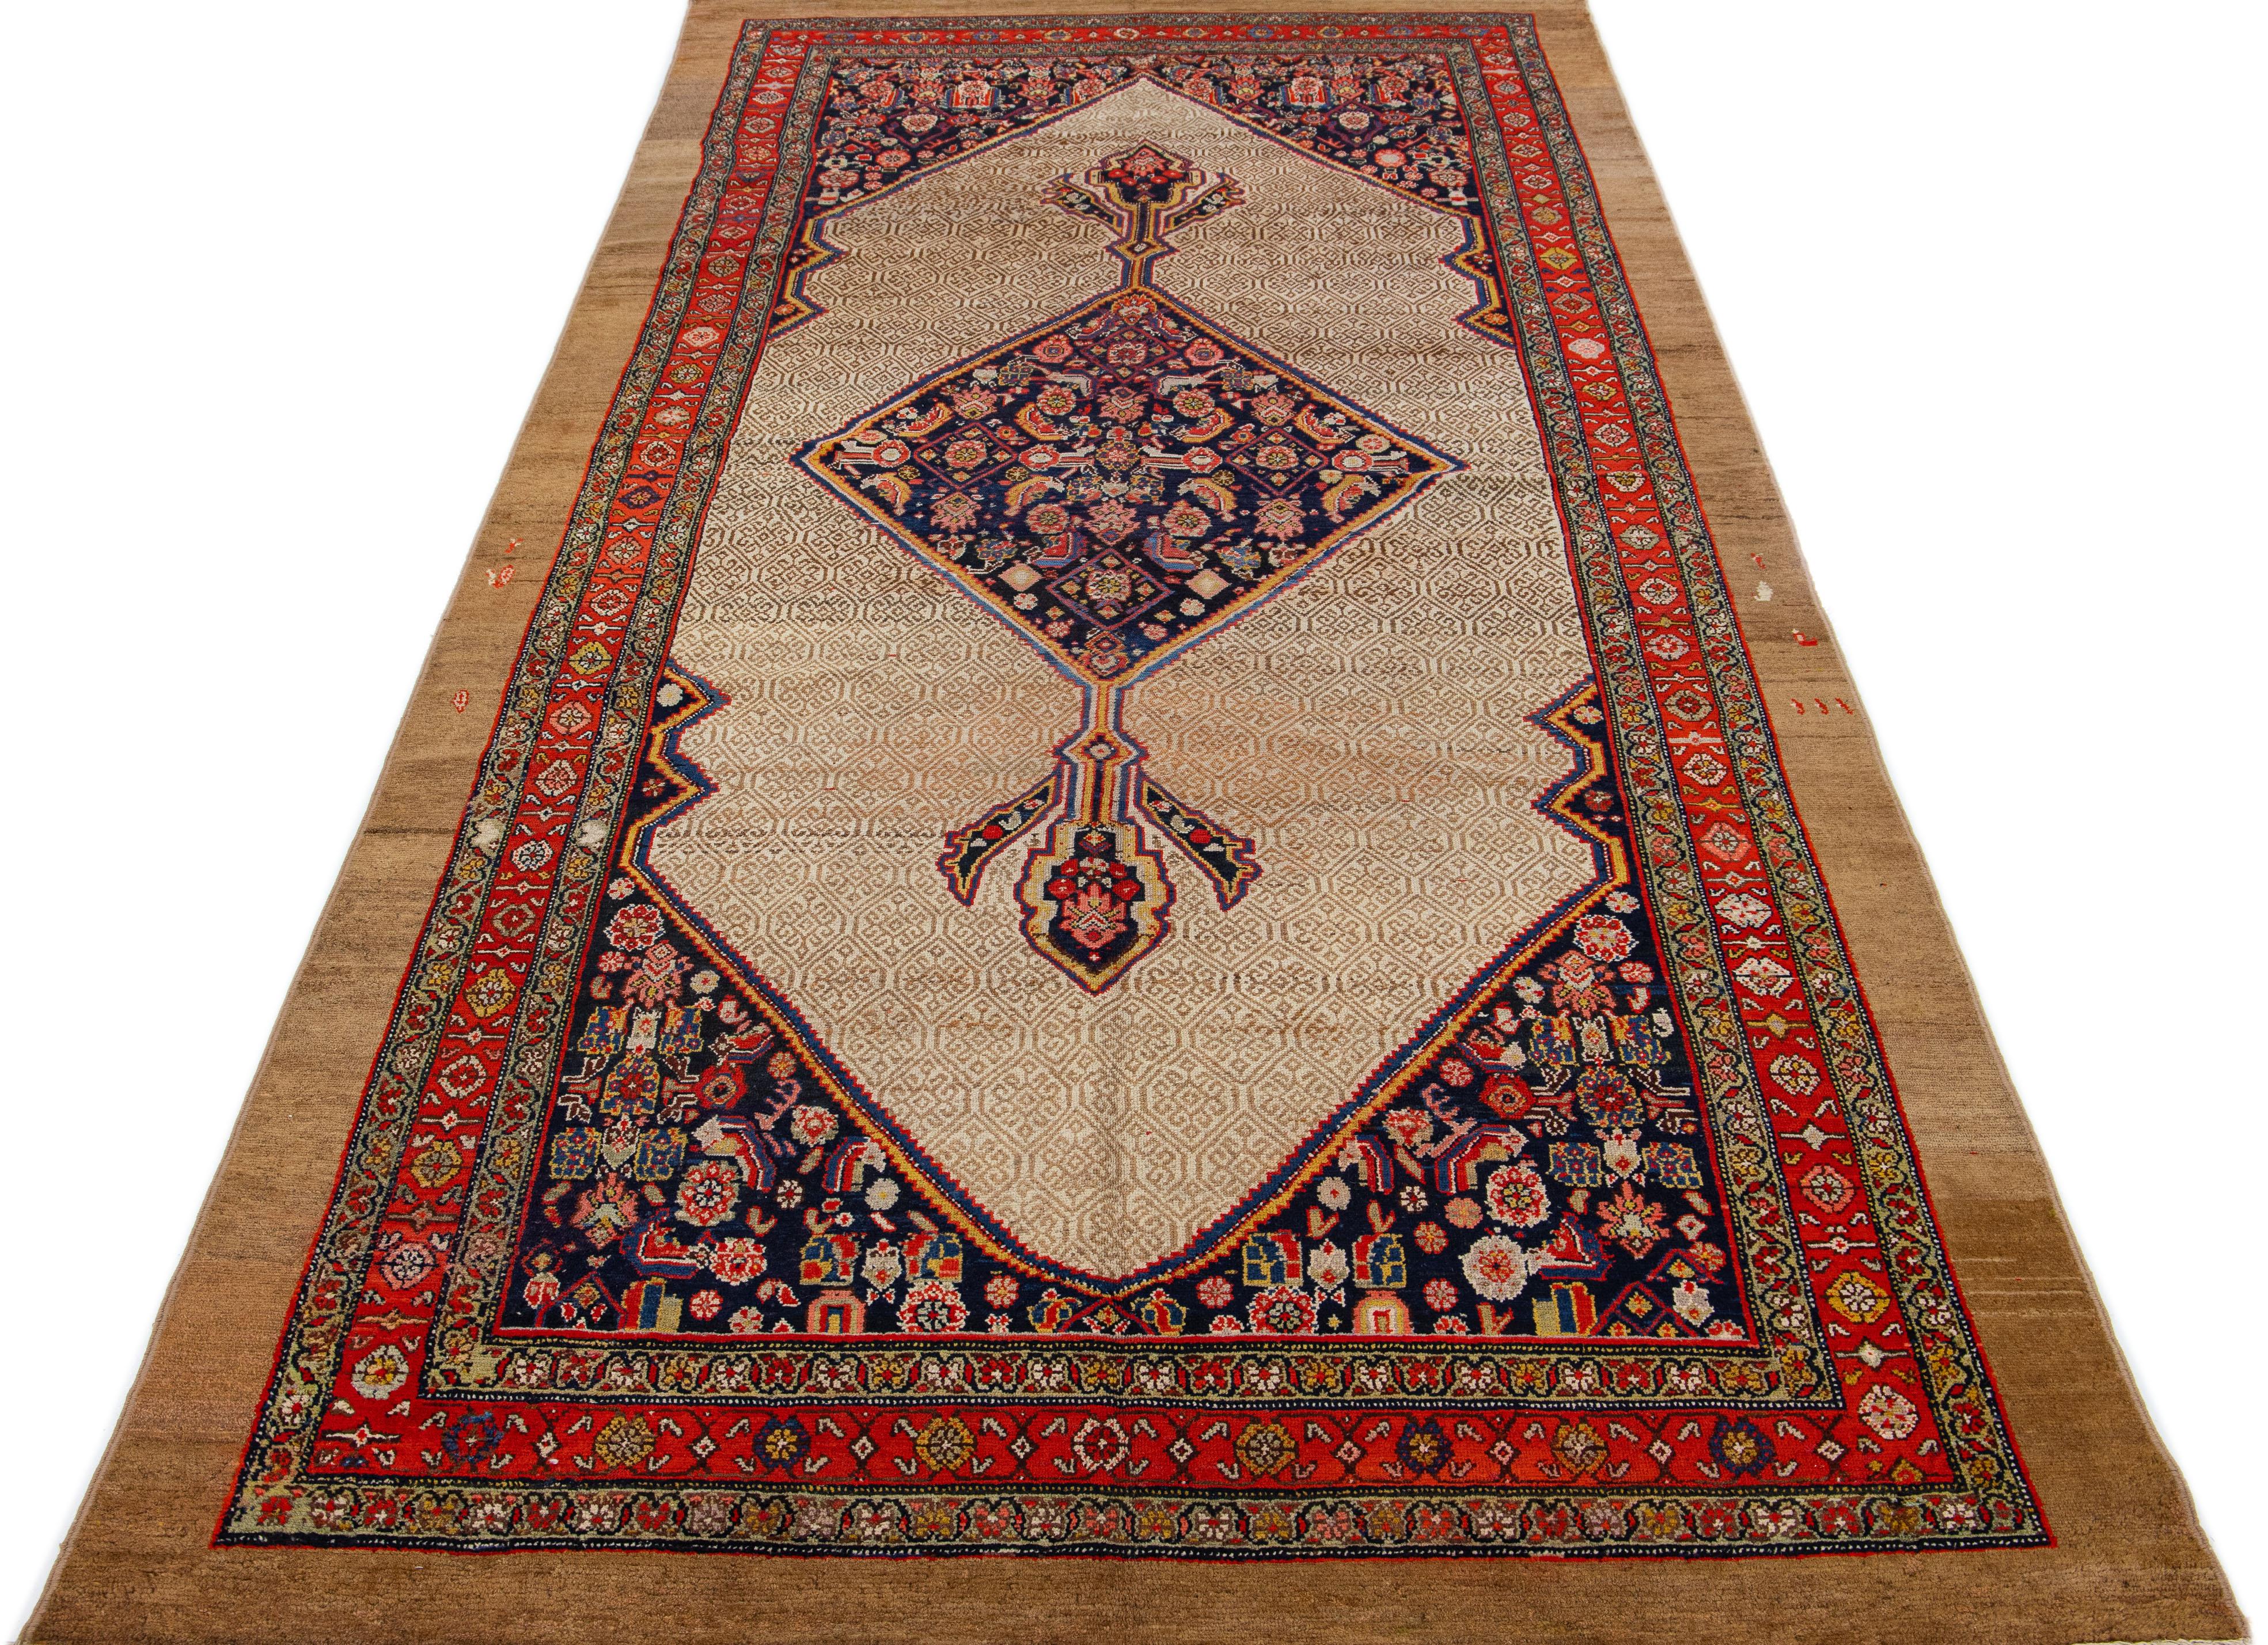 Beautiful antique Persian hand knotted wool rug with a beige color field. This piece has multicolor accents in a gorgeous blue medallion design.

This rug measures 6'6' x 13'9